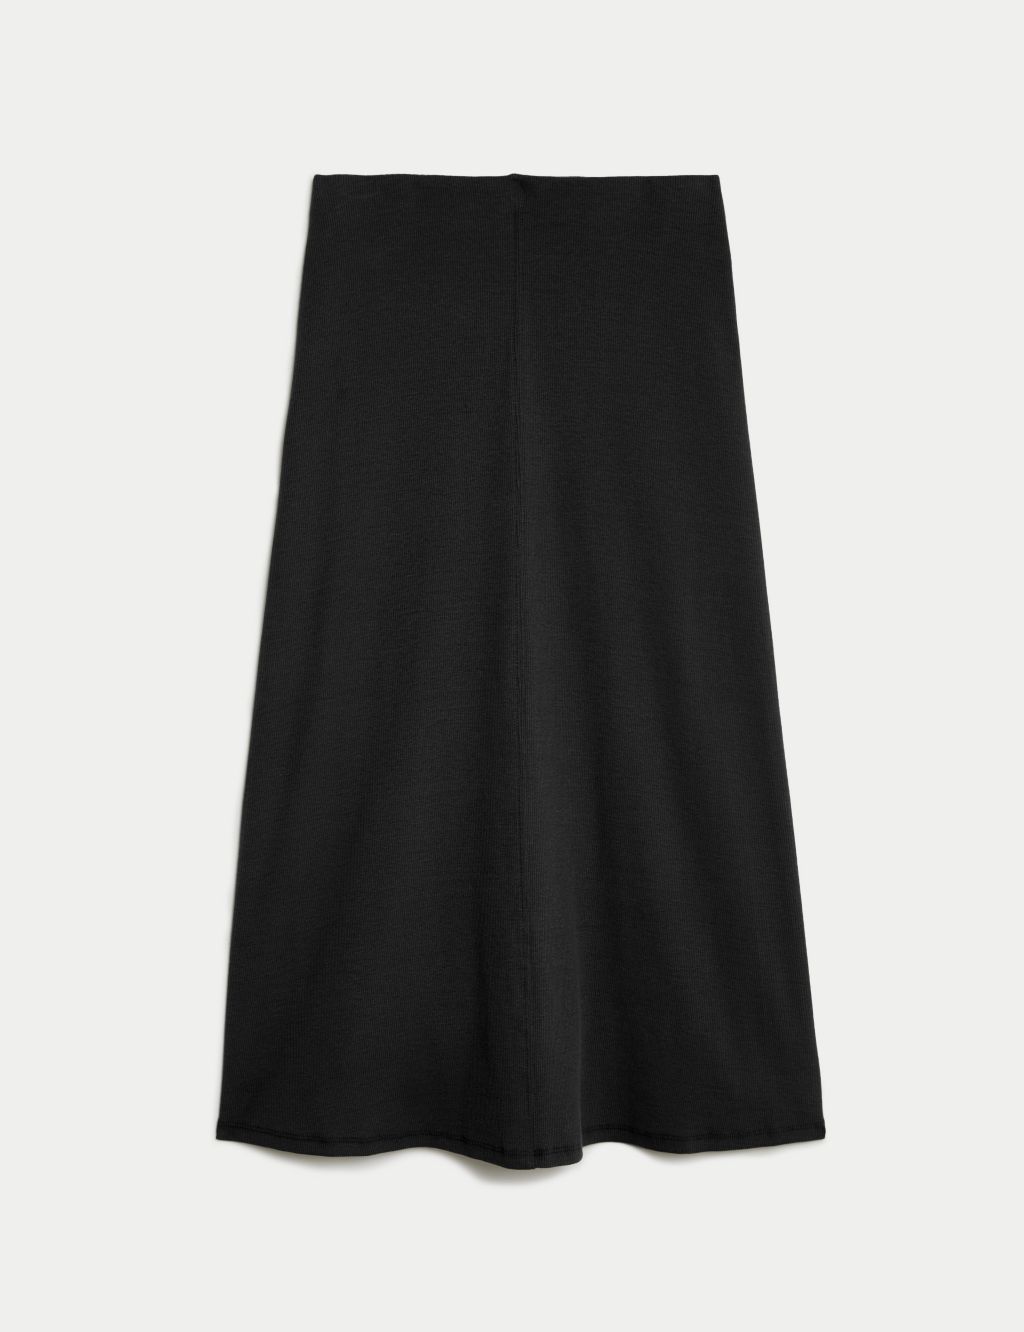 Cotton Rich Ribbed Midi A-Line Skirt image 2